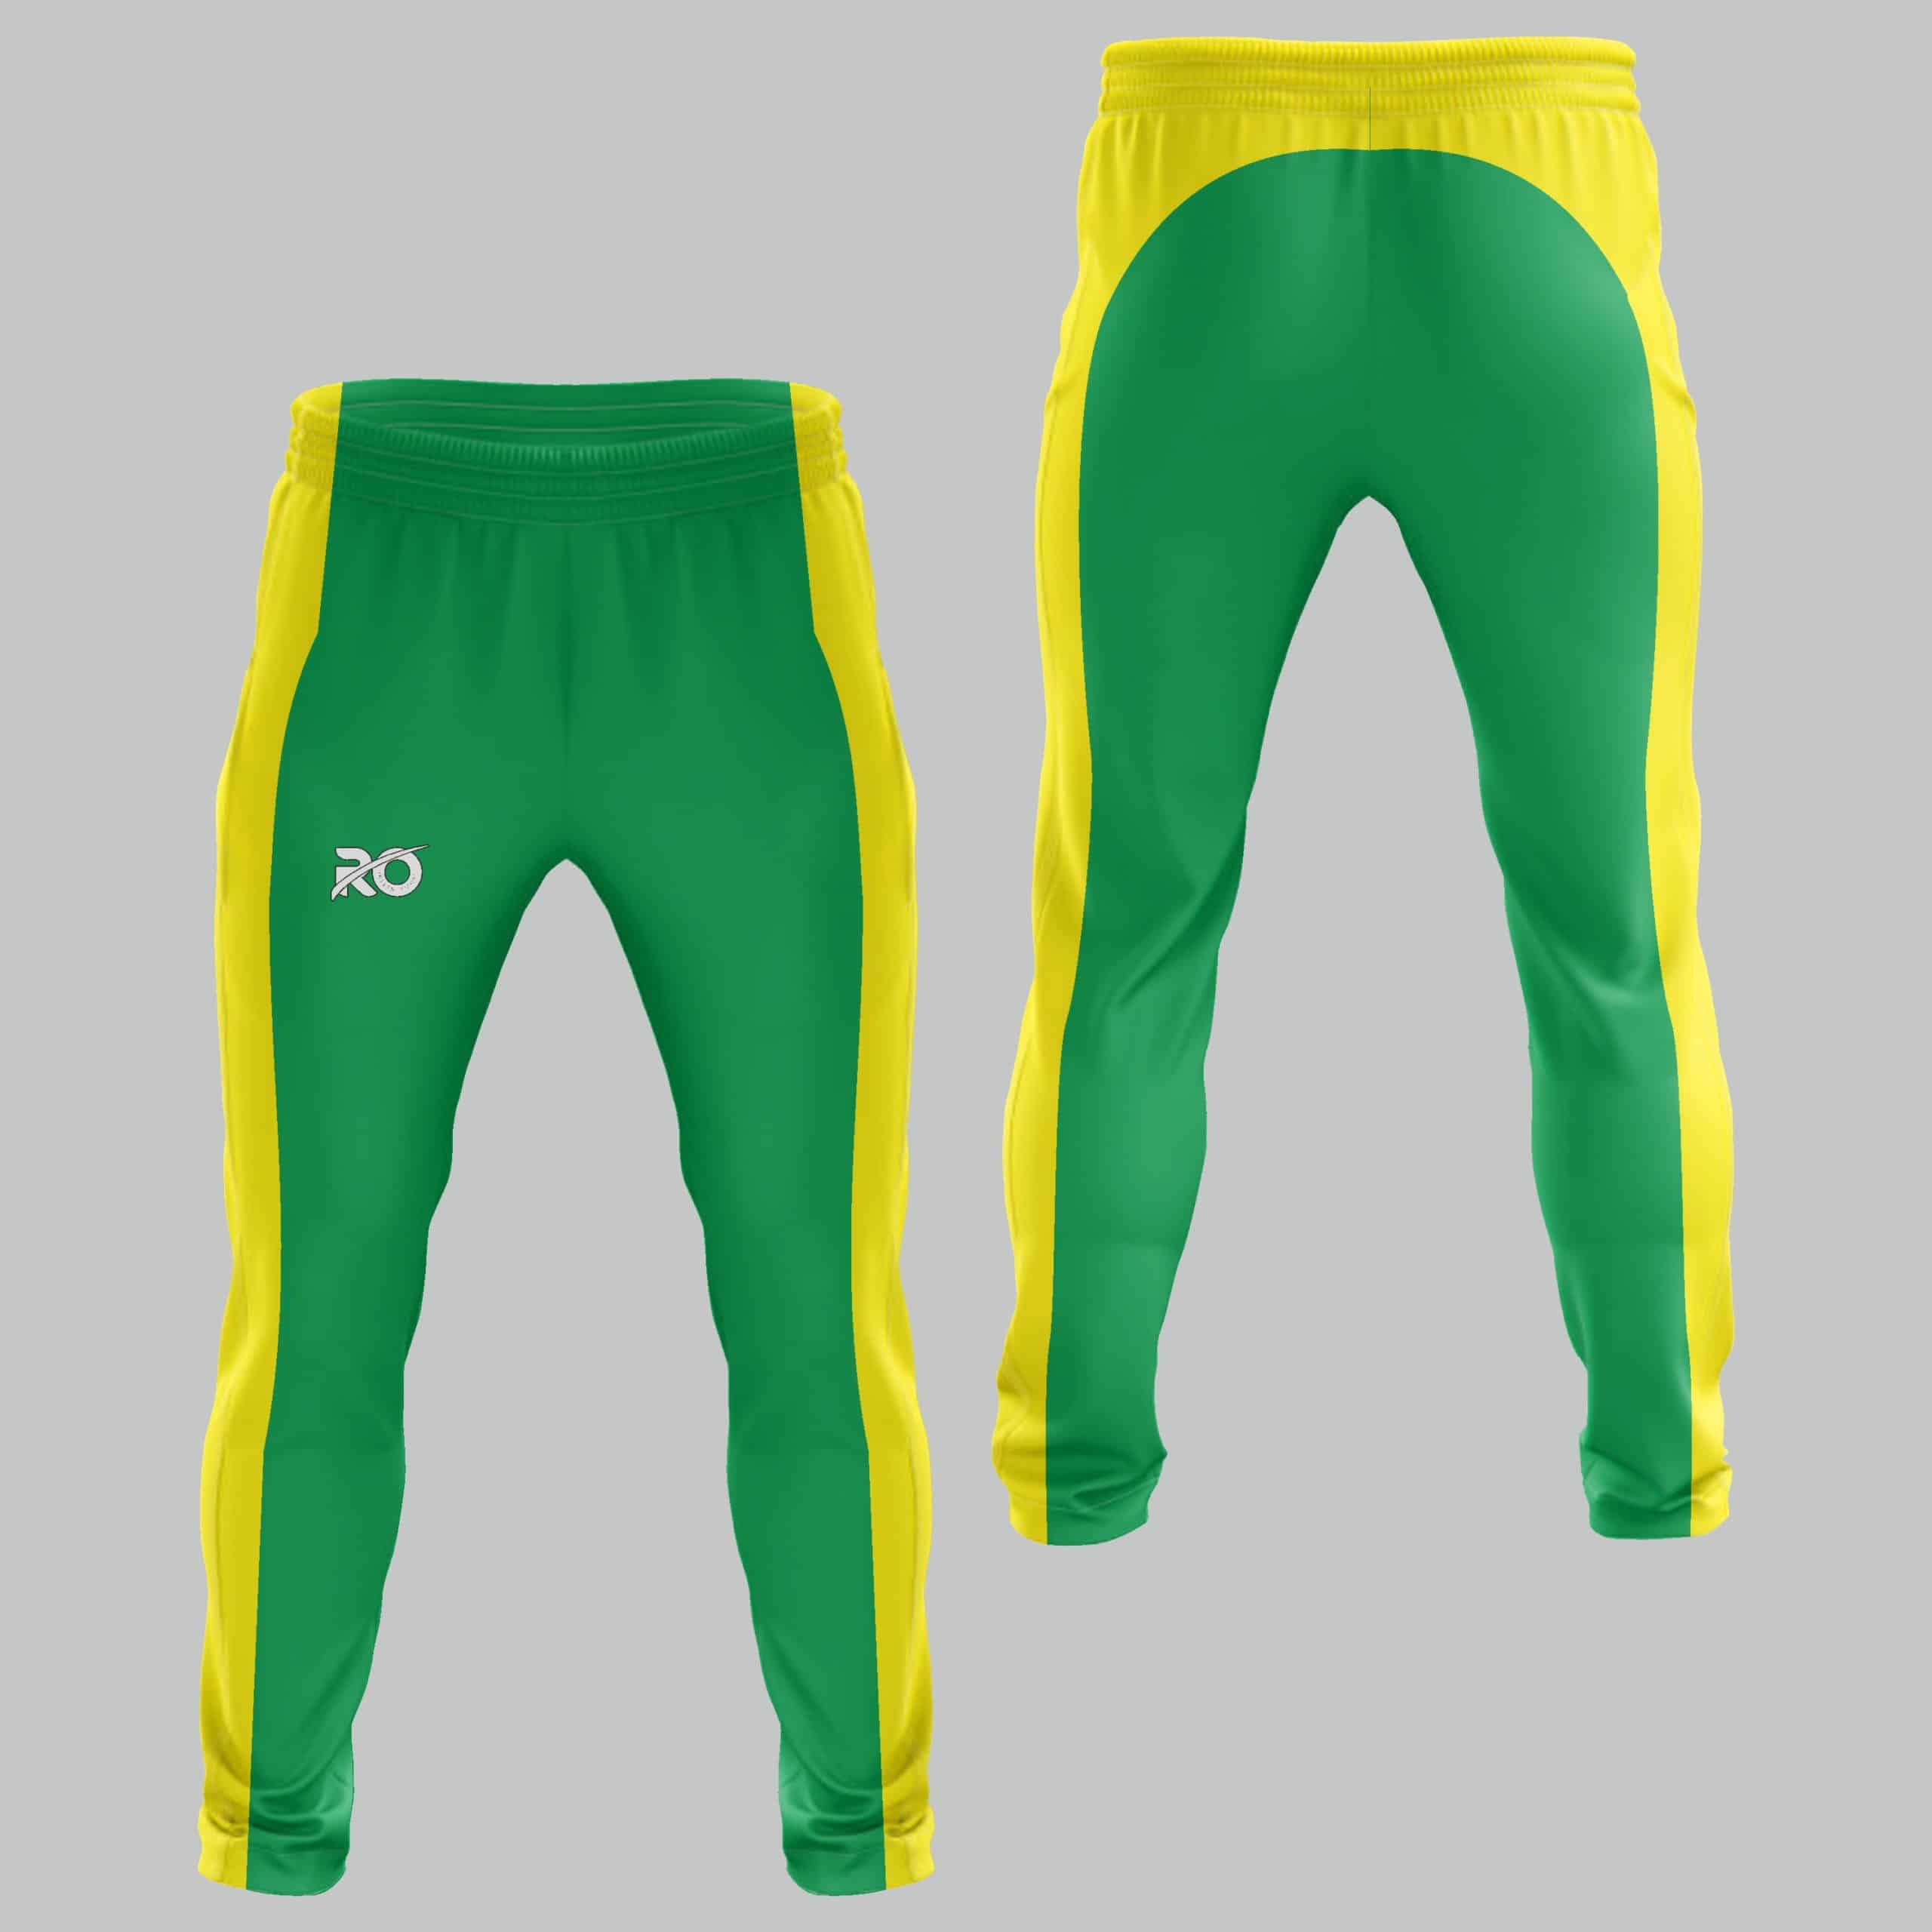 CONSTRUCTION WORKER SWAG - Yellow Track Pants – www.prettyboutique.com